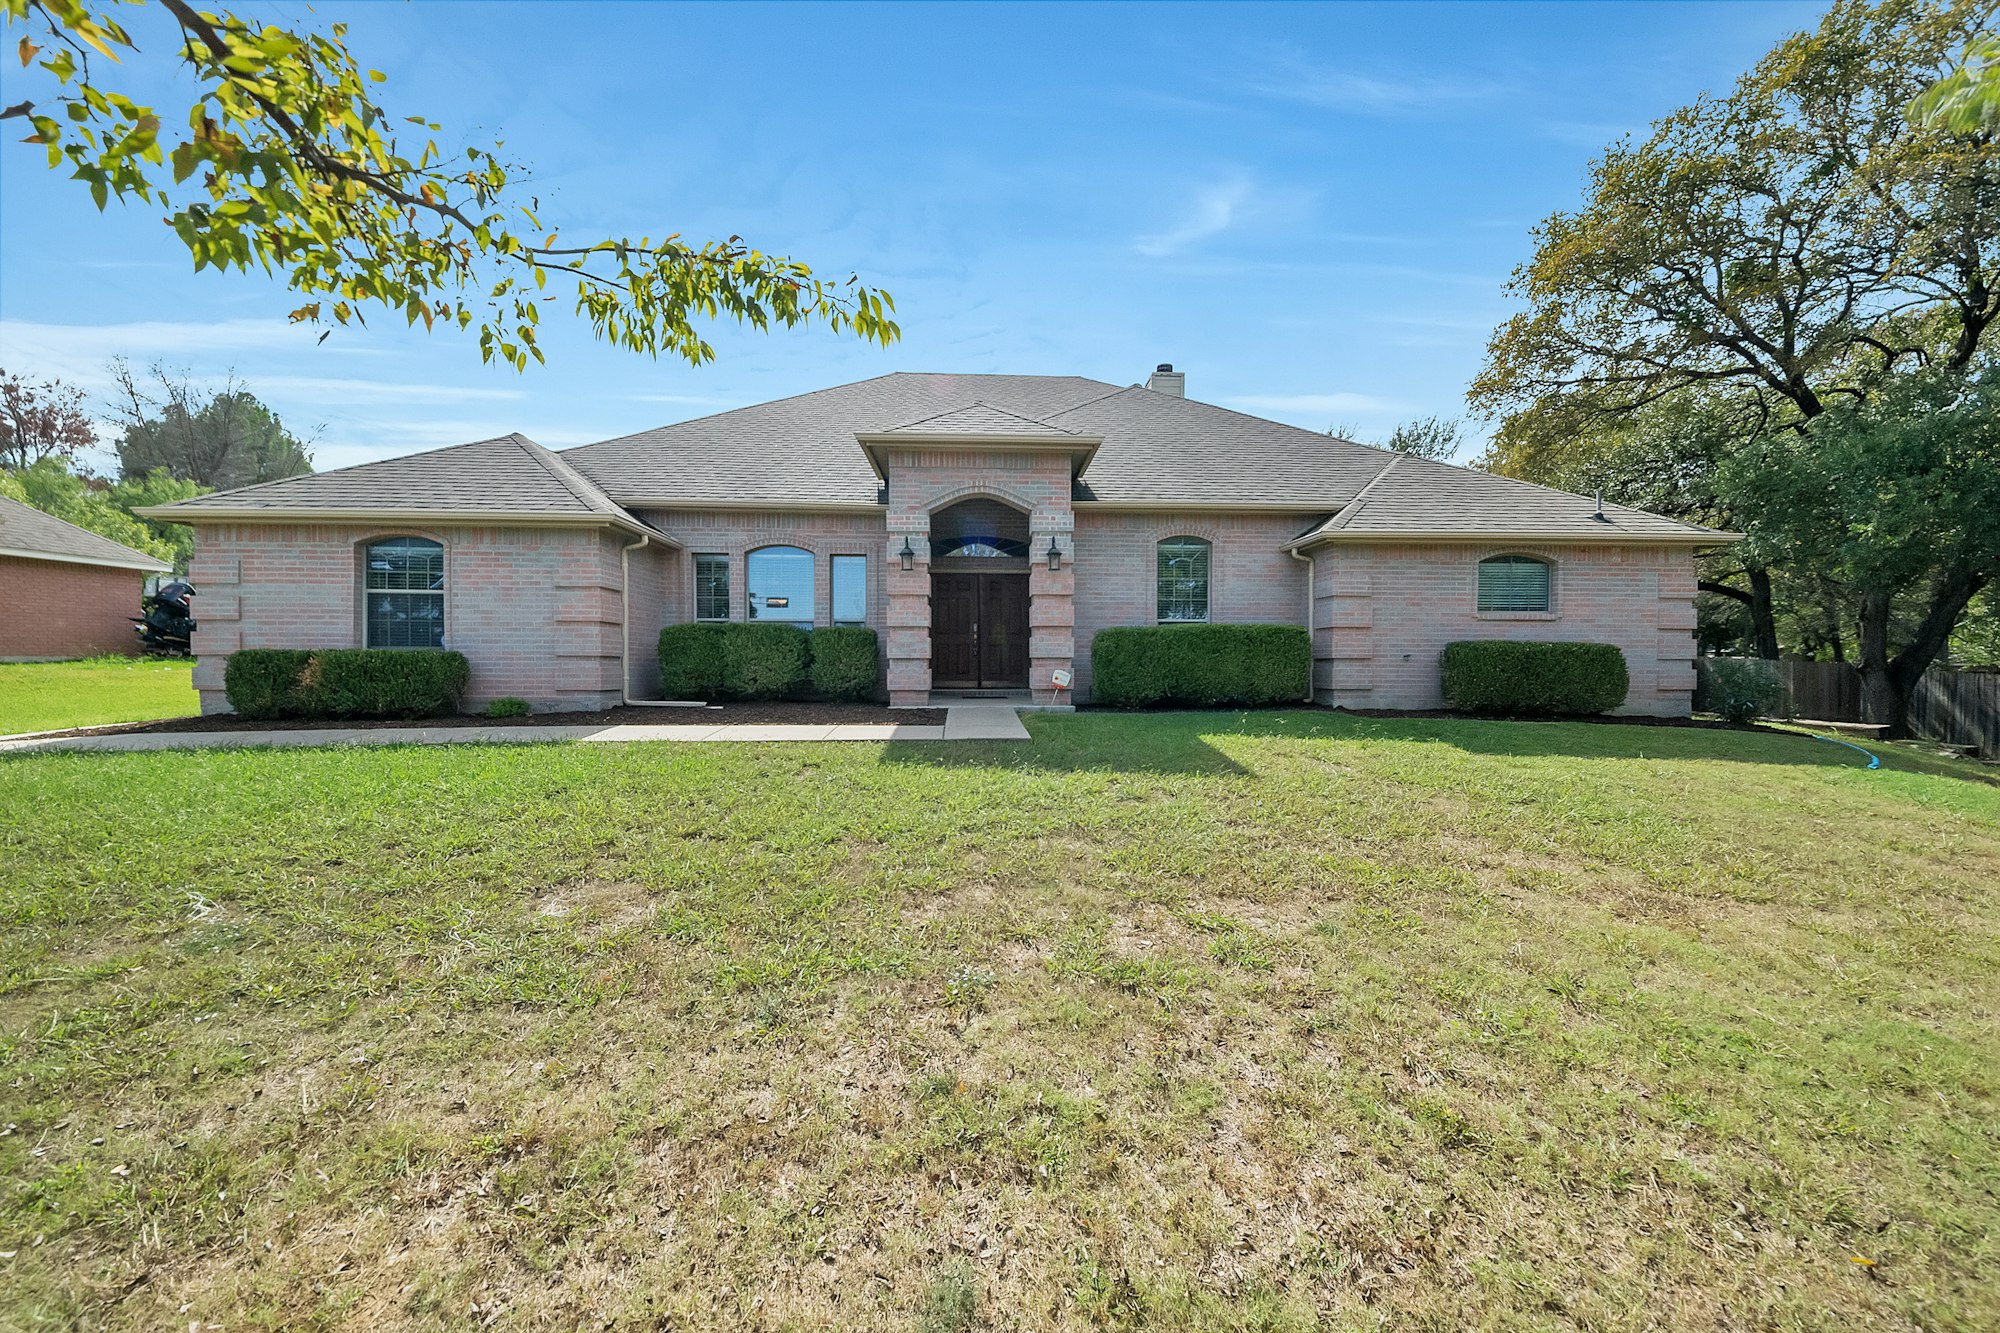 Photo 1 of 32 - 1105 NW Renfro St, Burleson, TX 76028